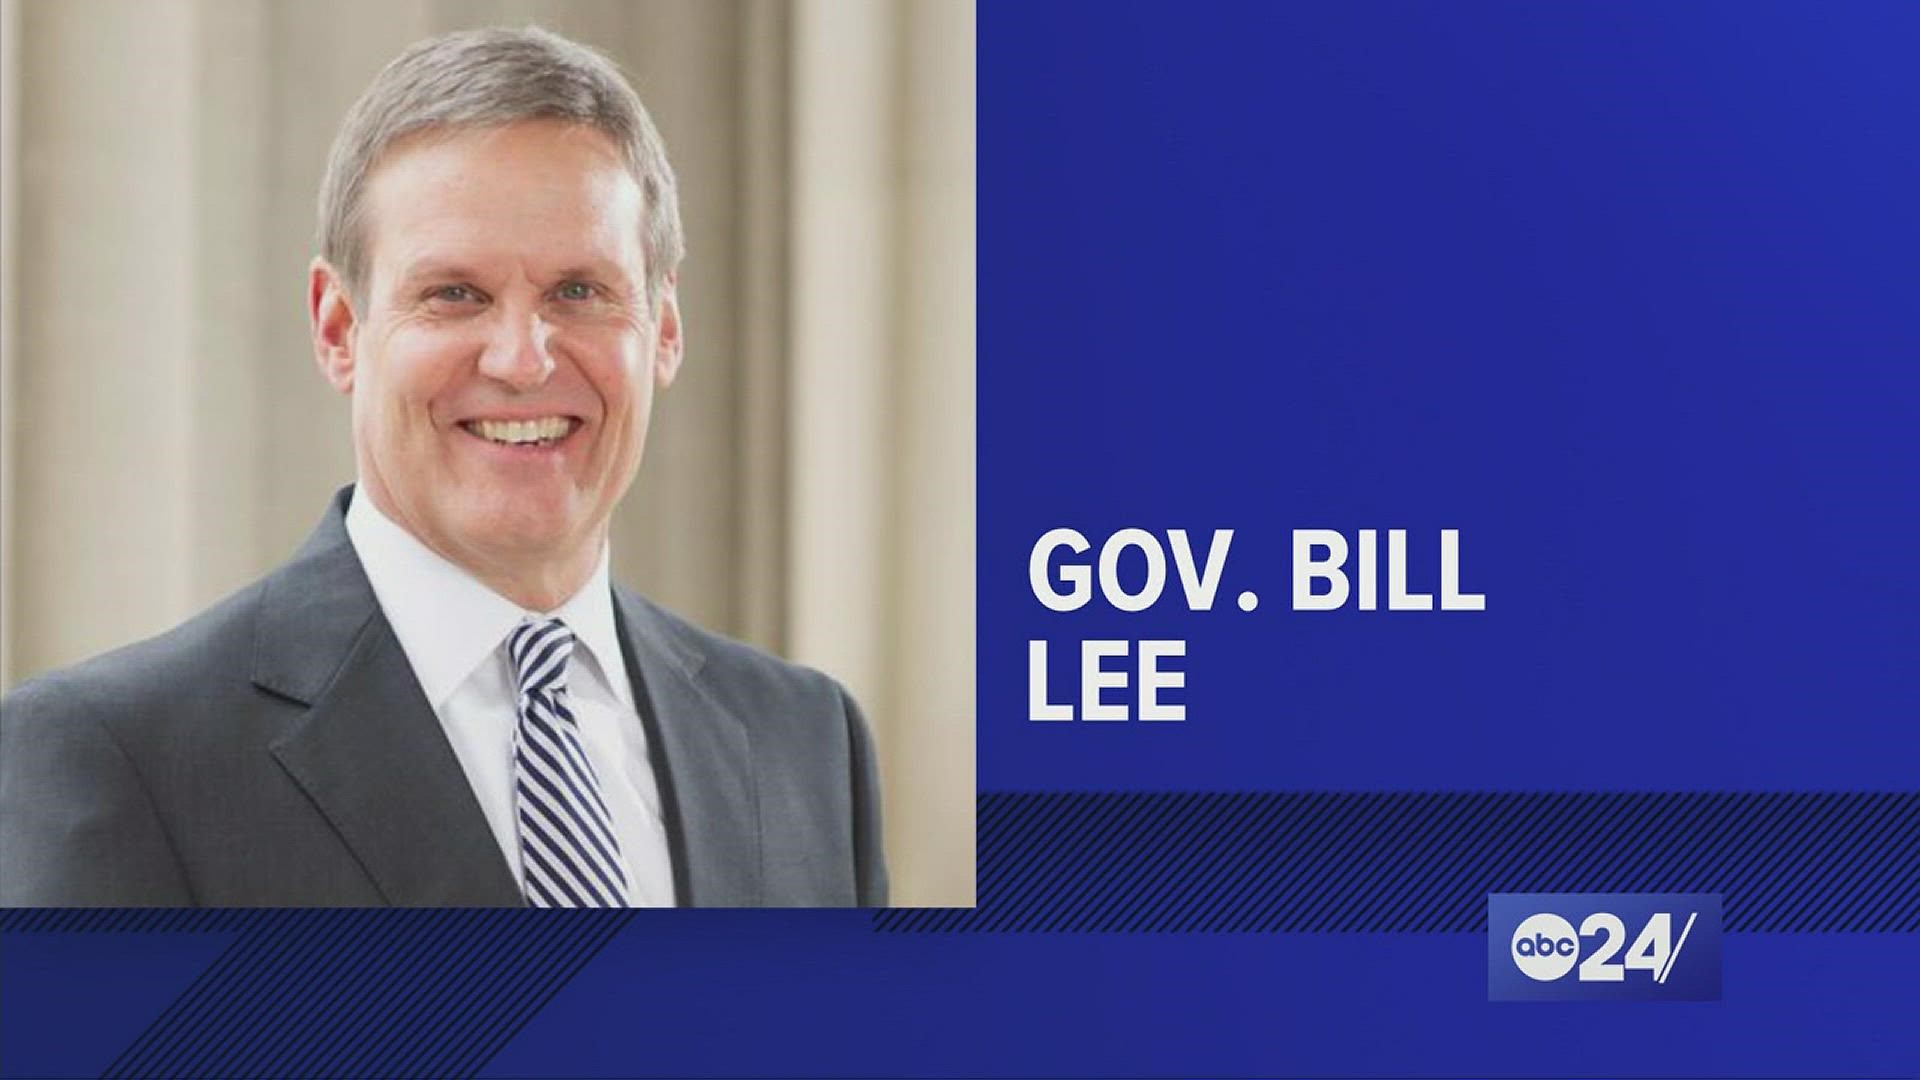 After Governor Bill Lee made comments about believing Tennessee's "Right to Work" law is "under attack," consultant Deidre Malone said that is "just not accurate."